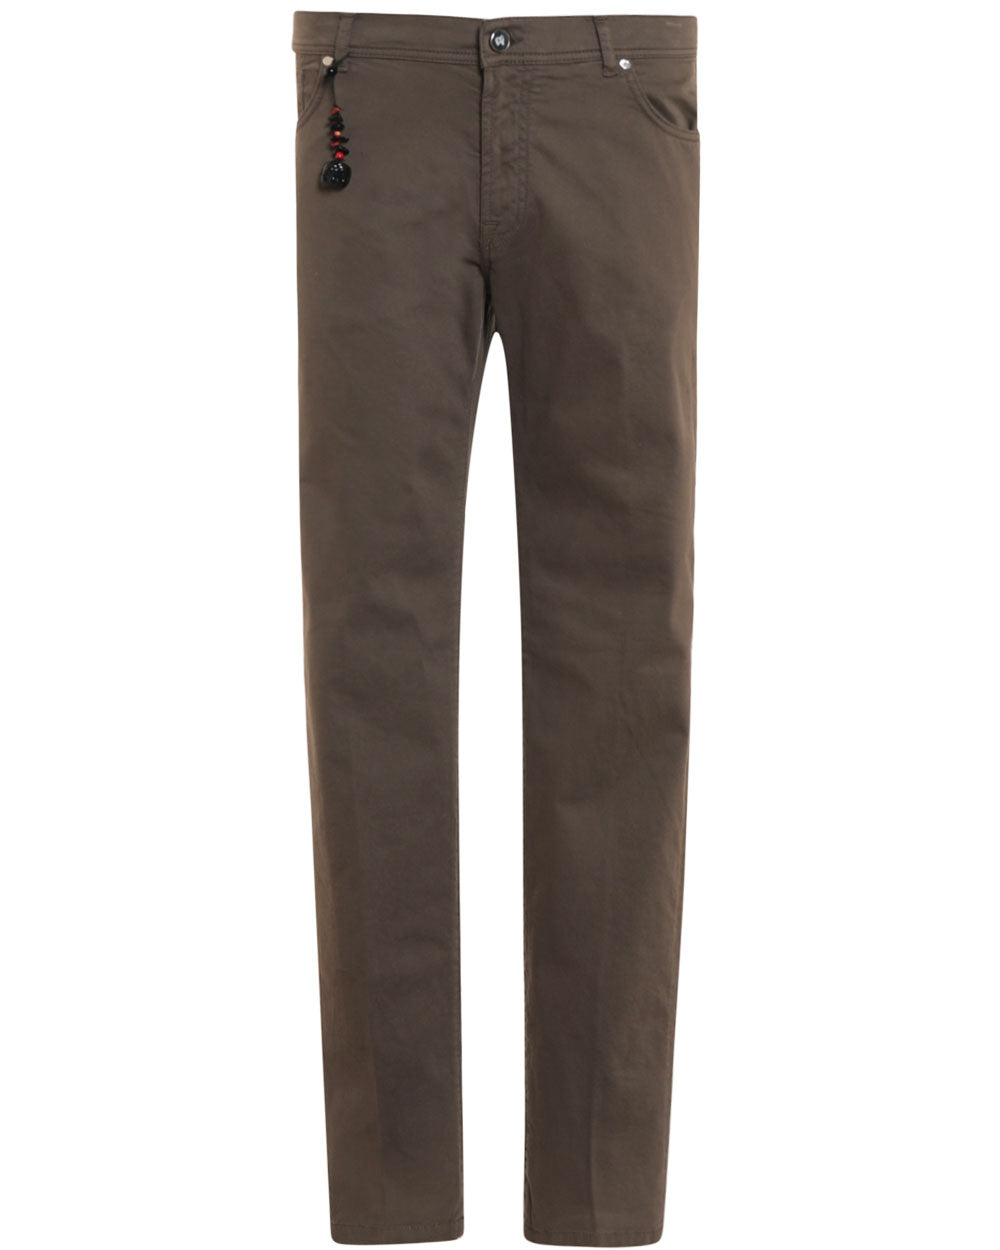 Brown Sueded Supima Cotton Casual Pant